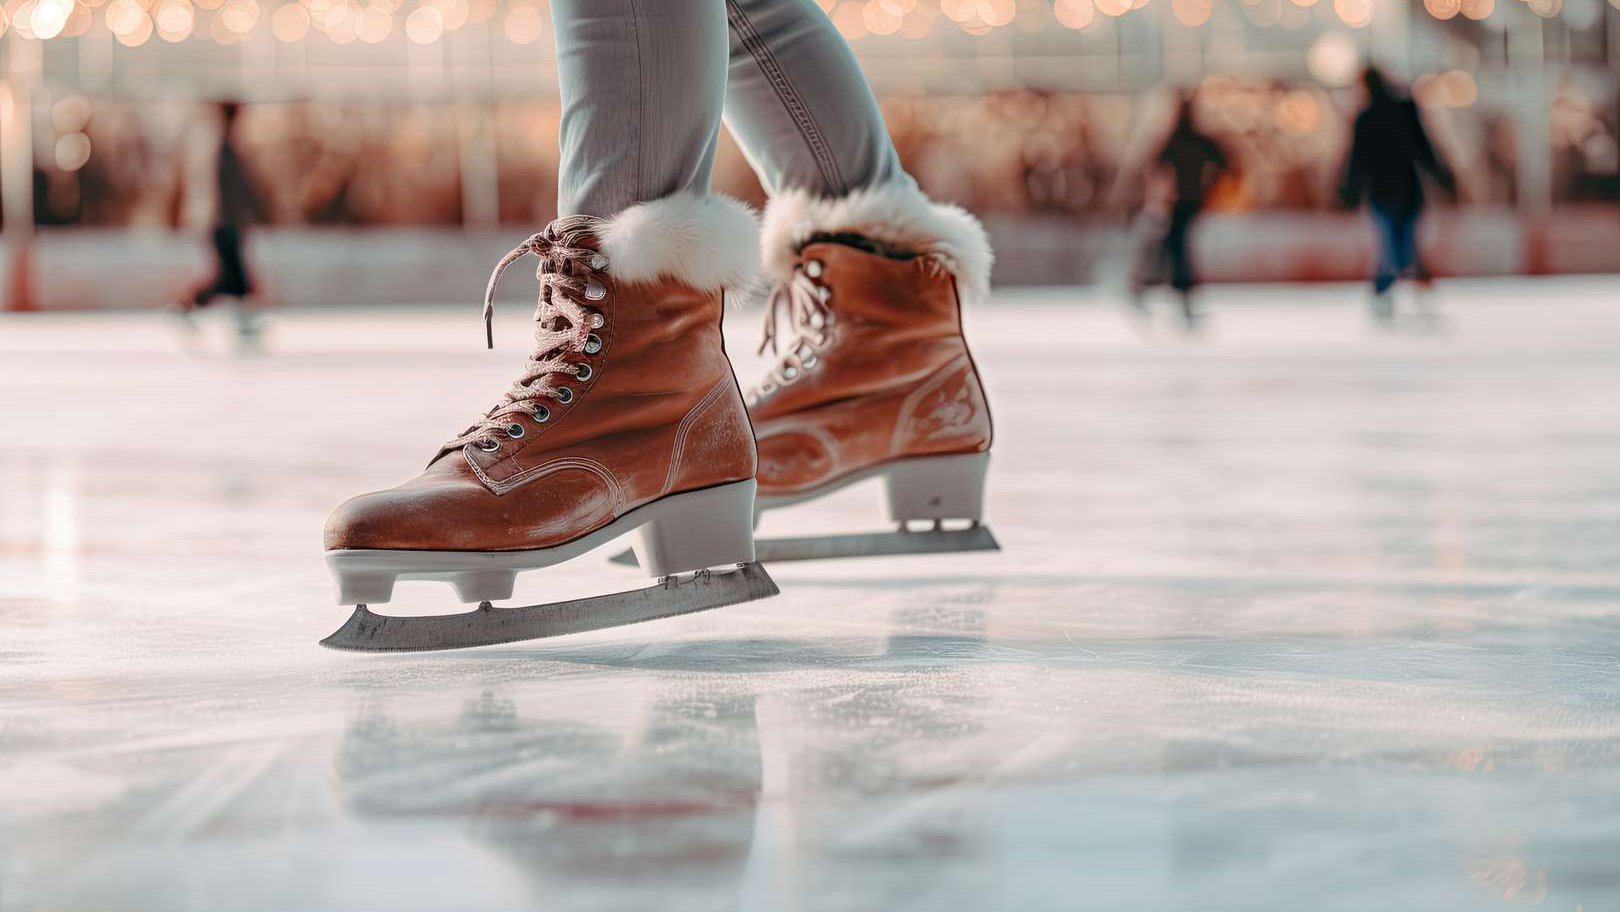 ⛸ The best locations to go ice skating in Tbilisi